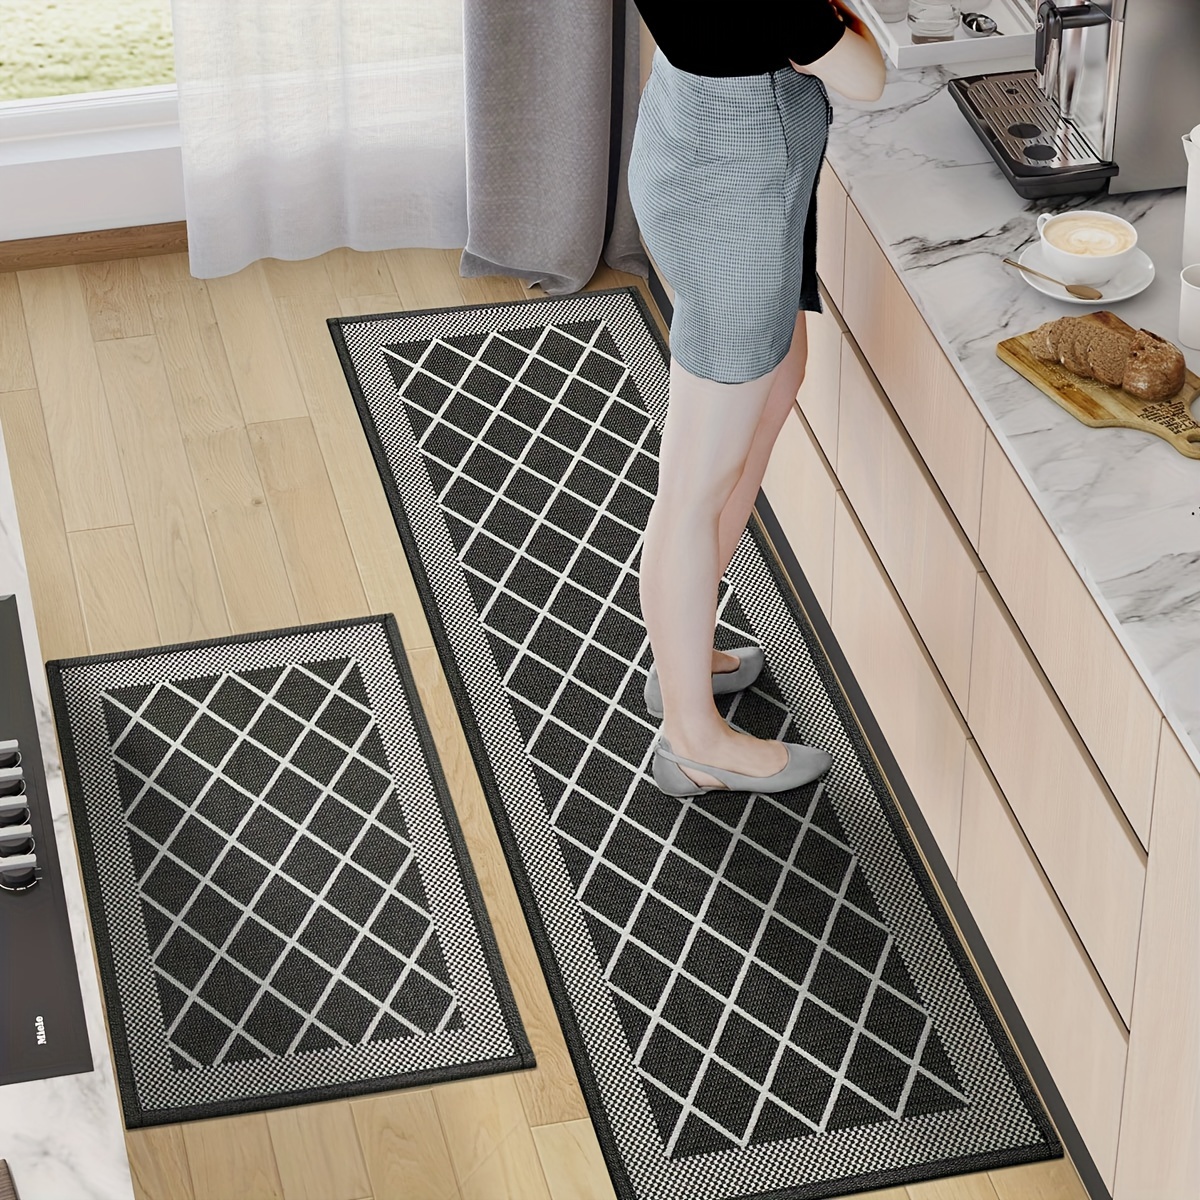 

2 Pcs Kitchen Rugs And Mats Non Slip Washable, Woven Kitchen Mats For Floor, Kitchen Runner Rug Kitchen Rug Set Of 2 For Kitchen, Front Of Sink, Laundry Room, Hallway